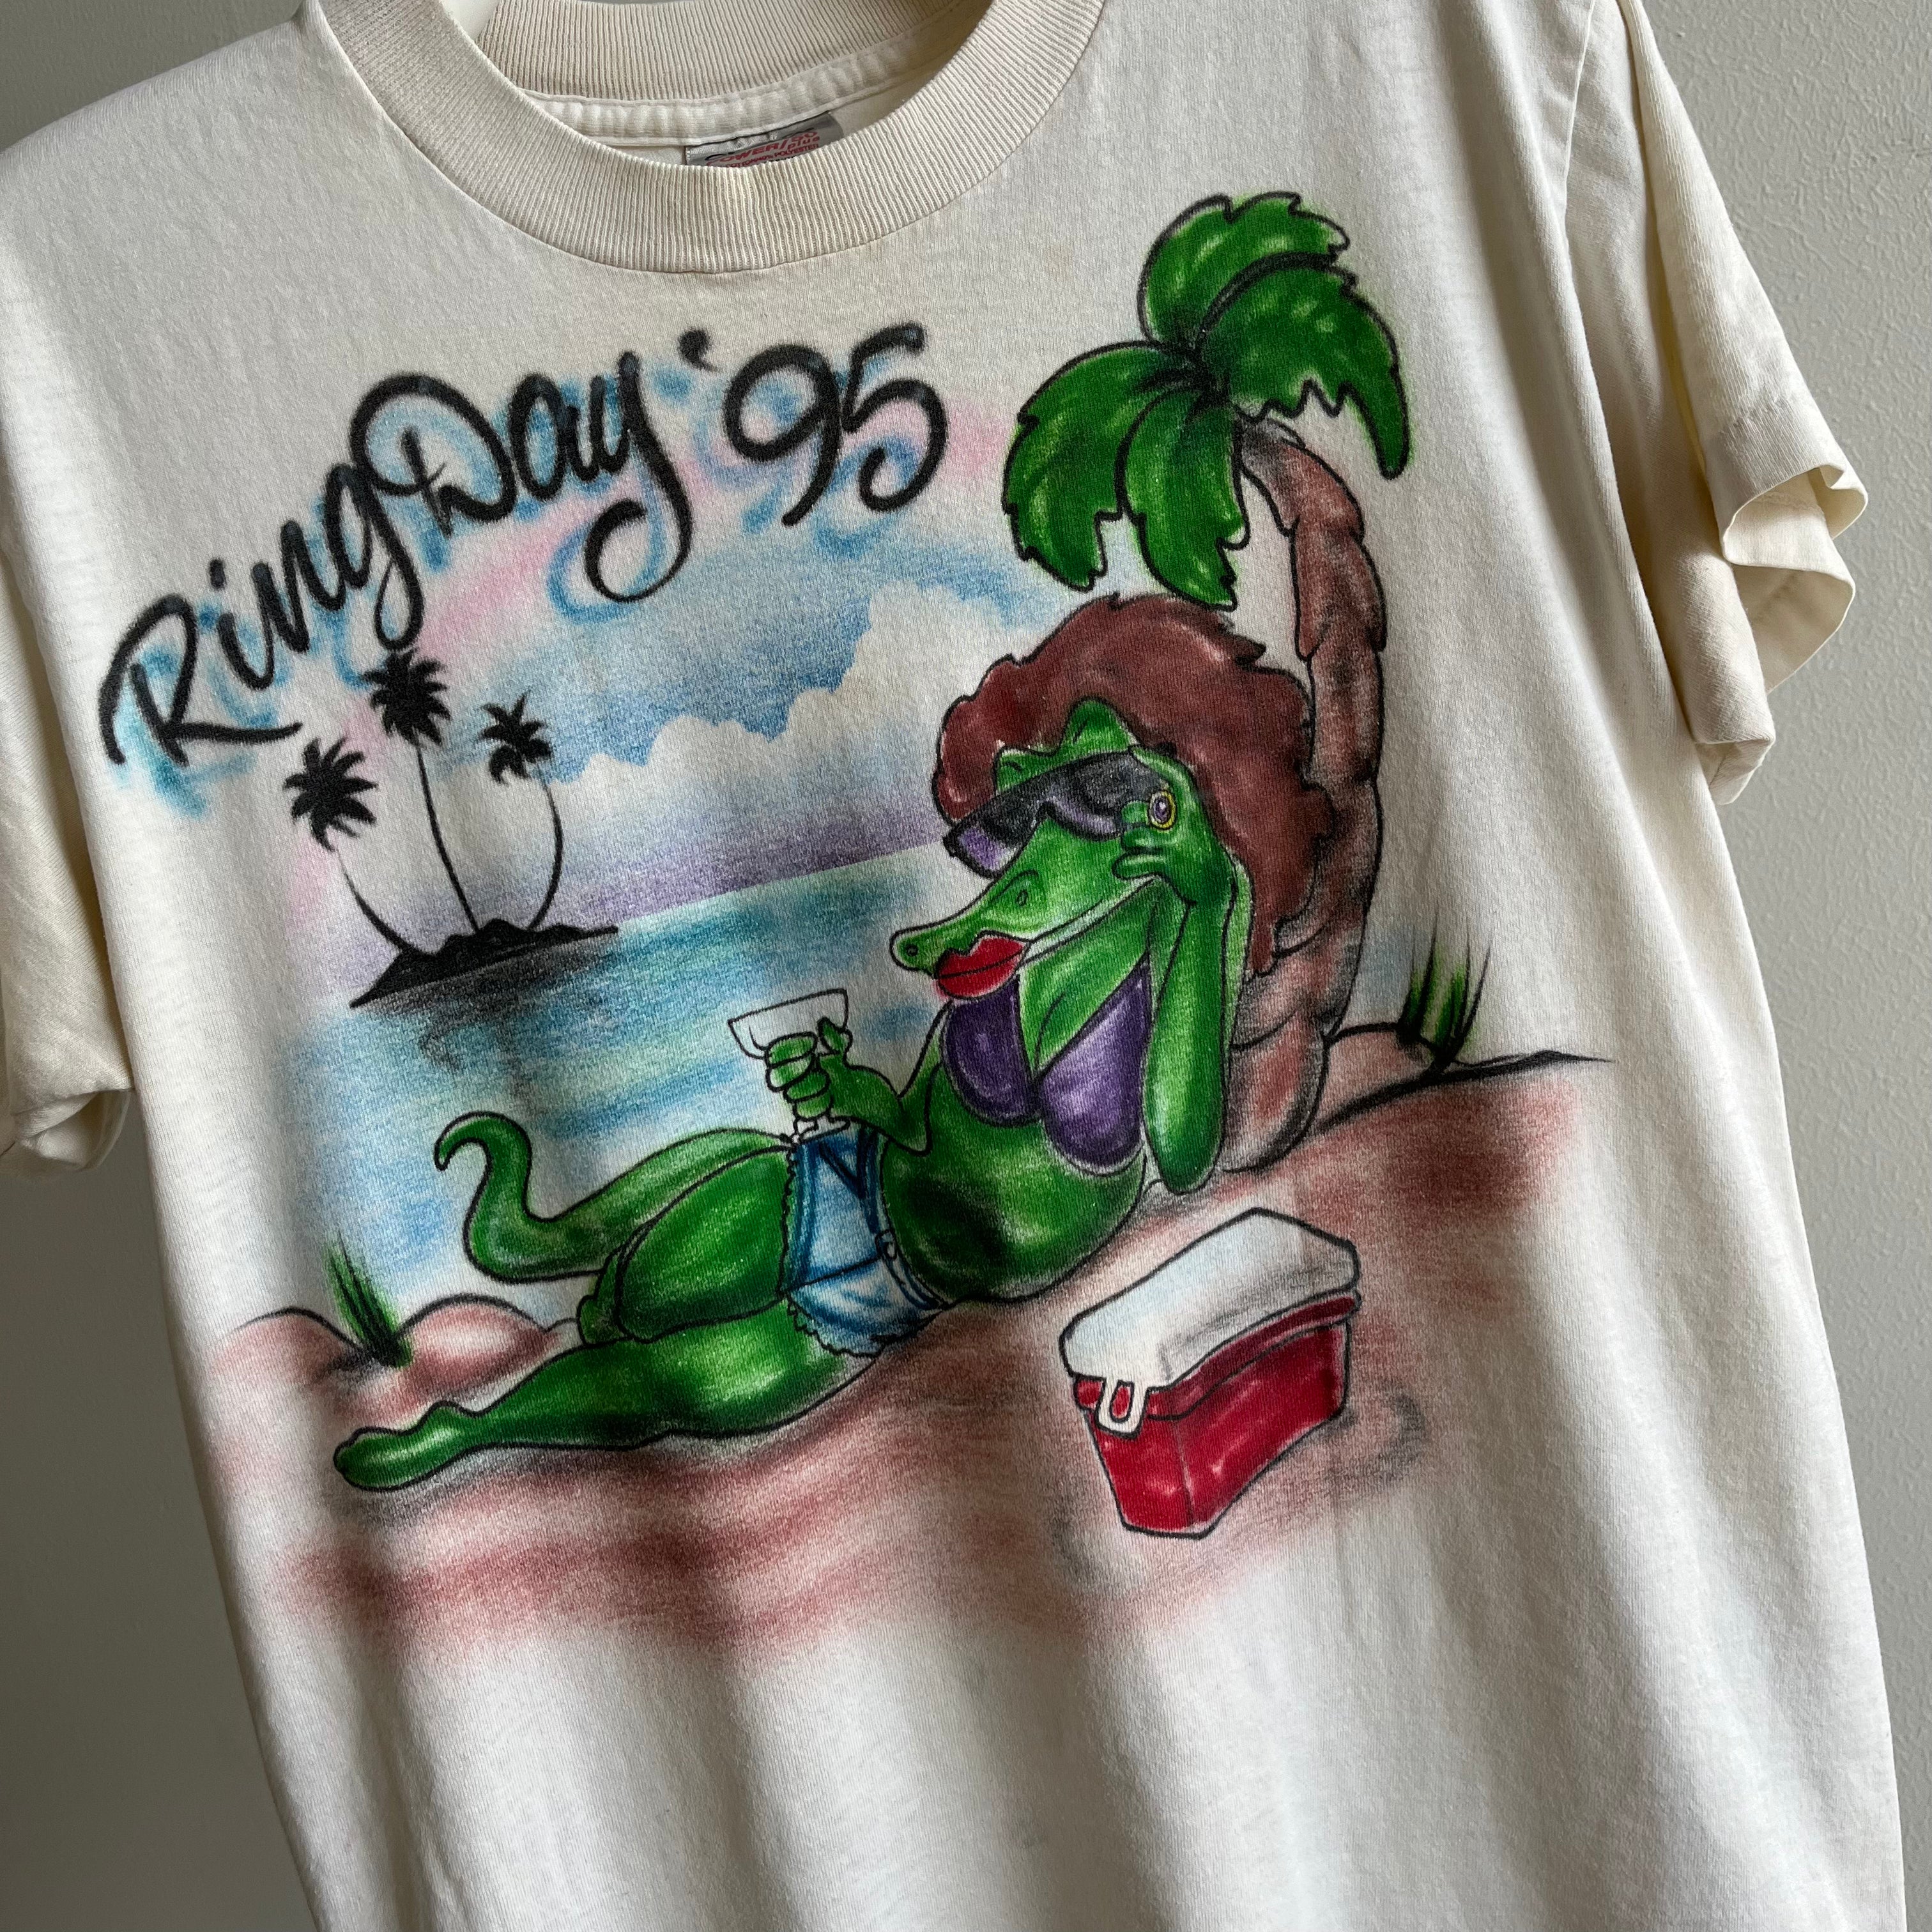 1995 RIng Day Gator in a Bikini with a Sunflower and 